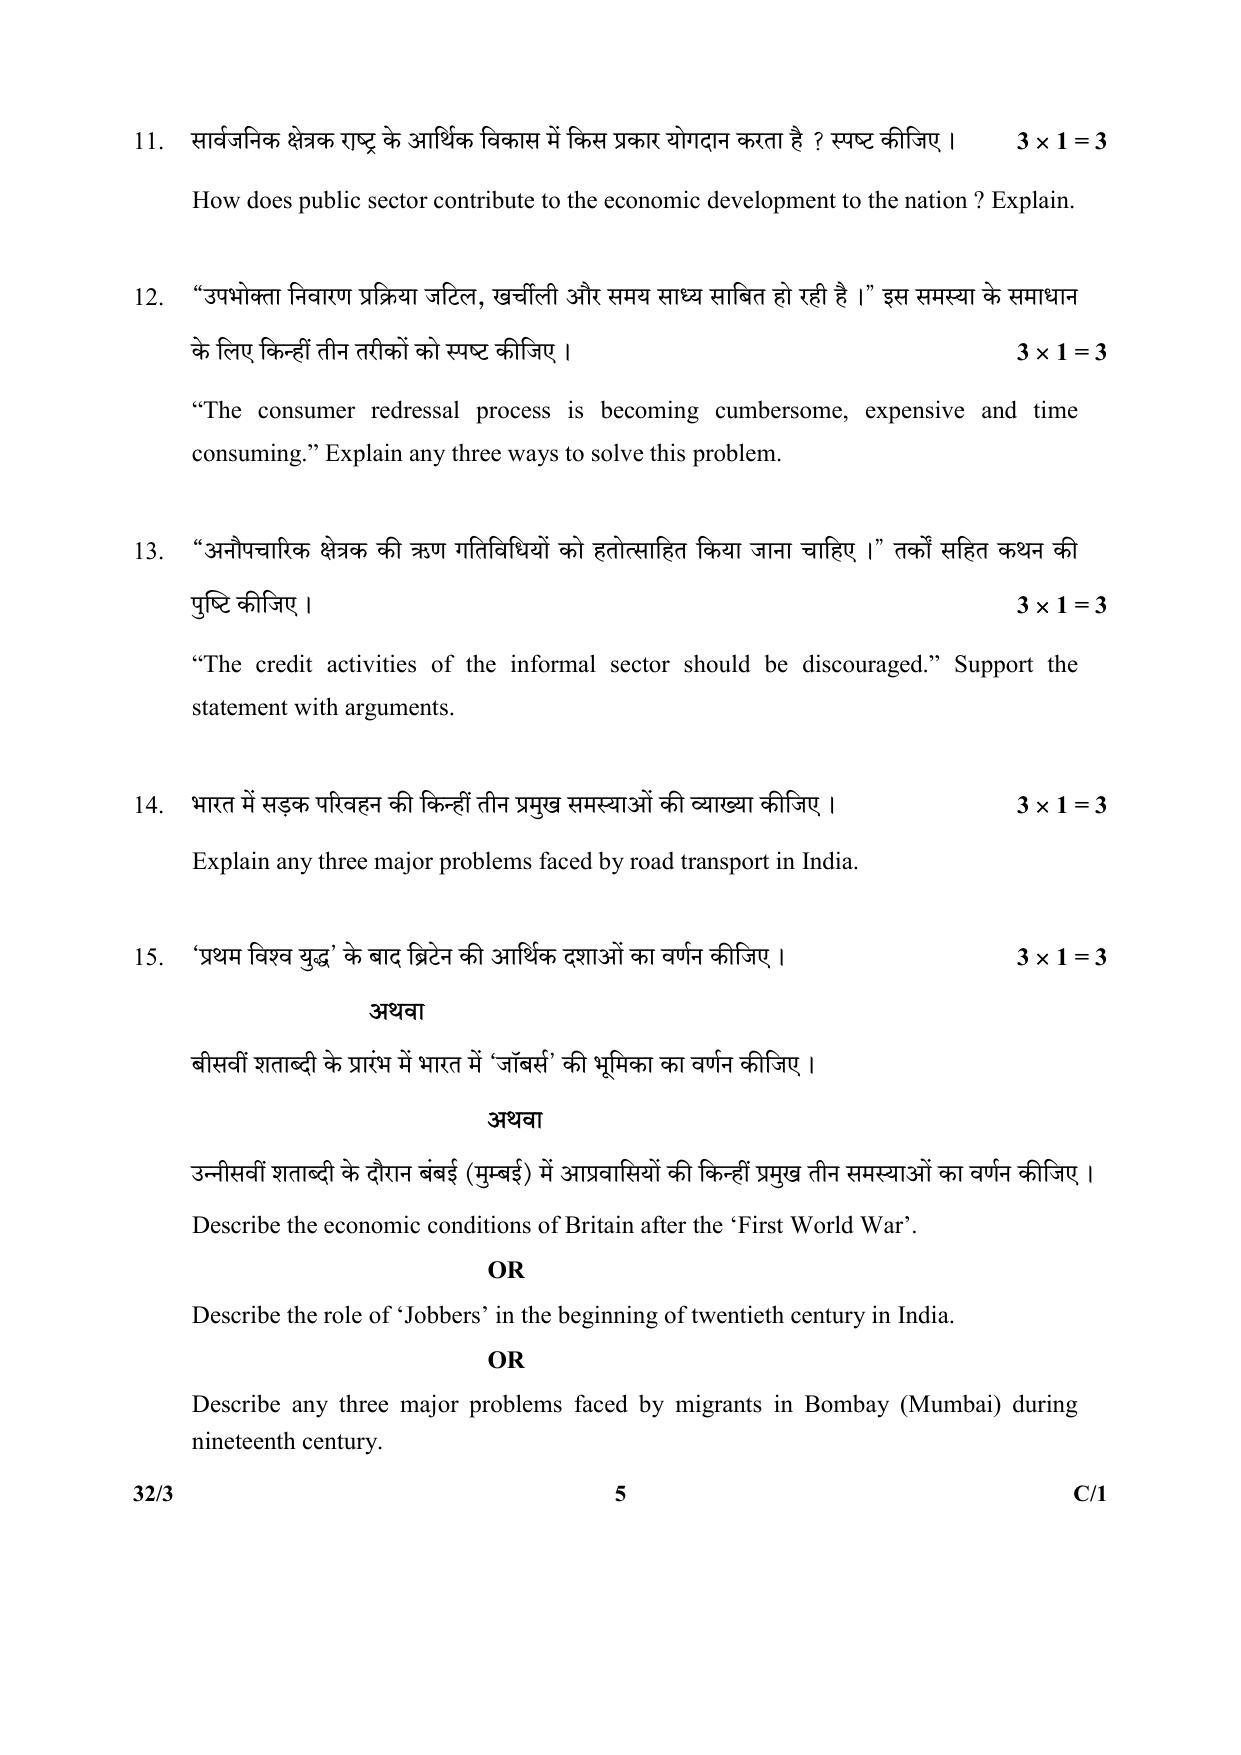 CBSE Class 10 32-3_Social Science 2018 Compartment Question Paper - Page 5